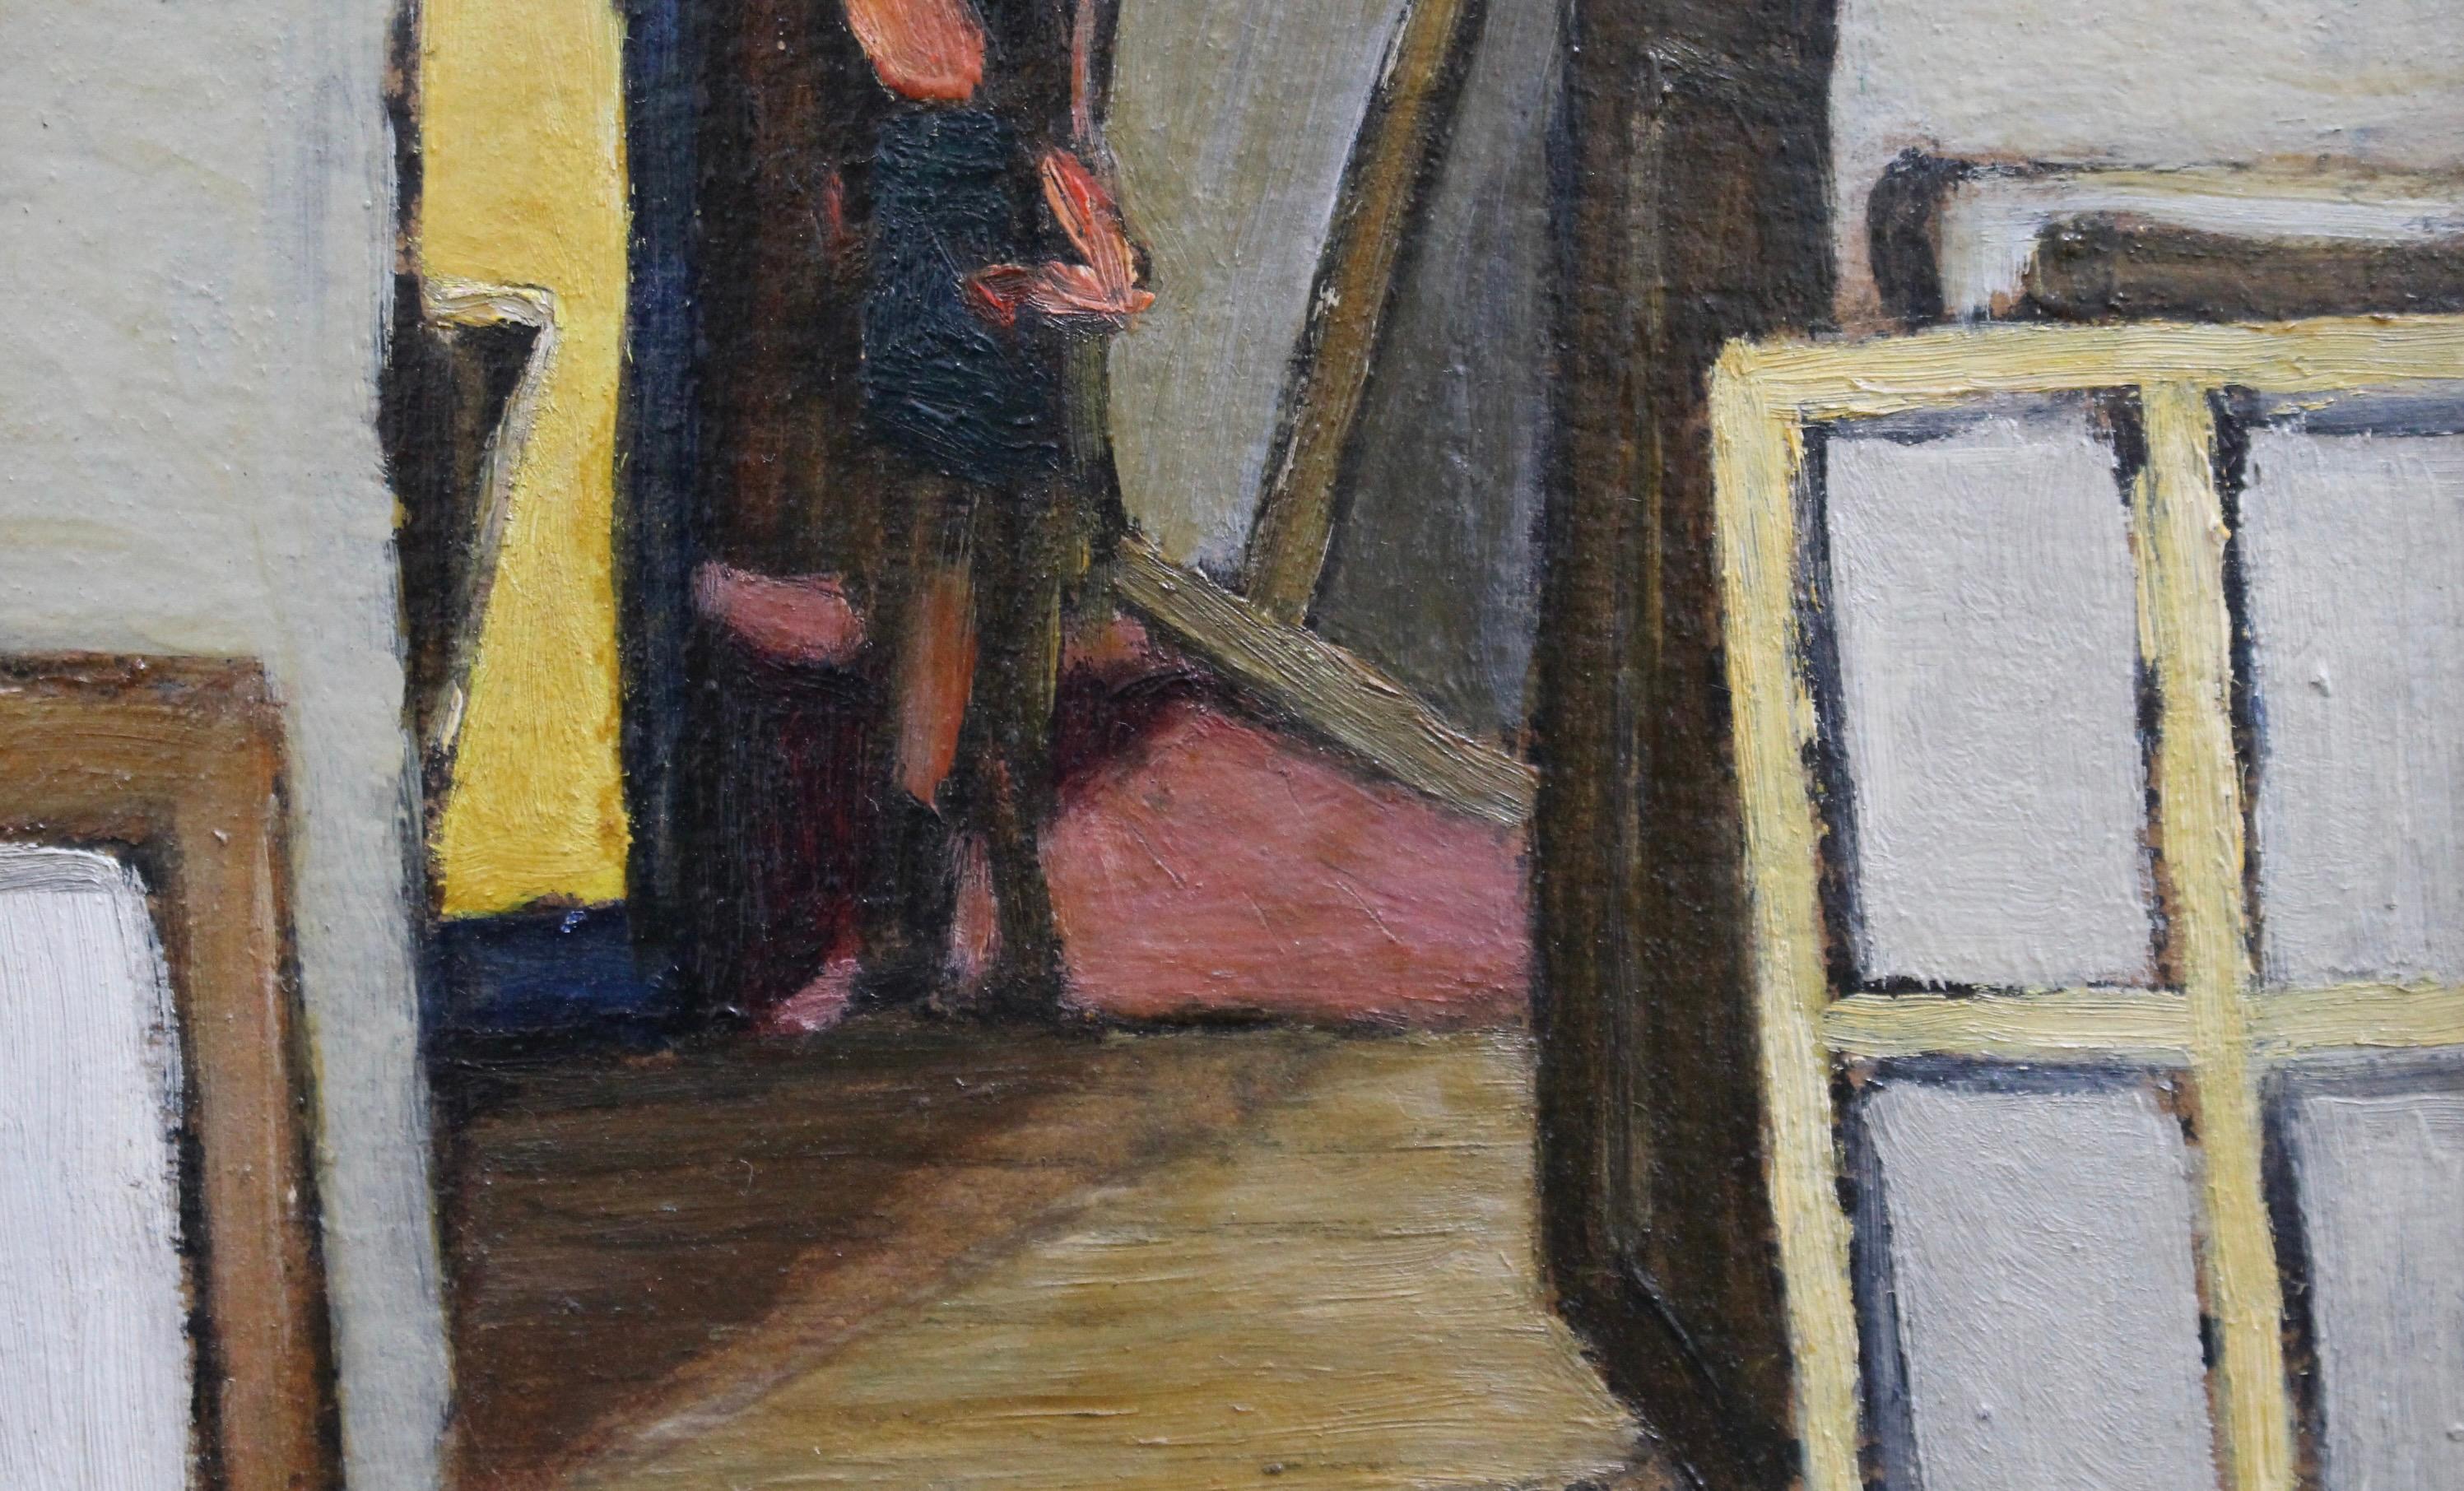 Woman and Child with Windows - Black Portrait Painting by Paul Ackerman